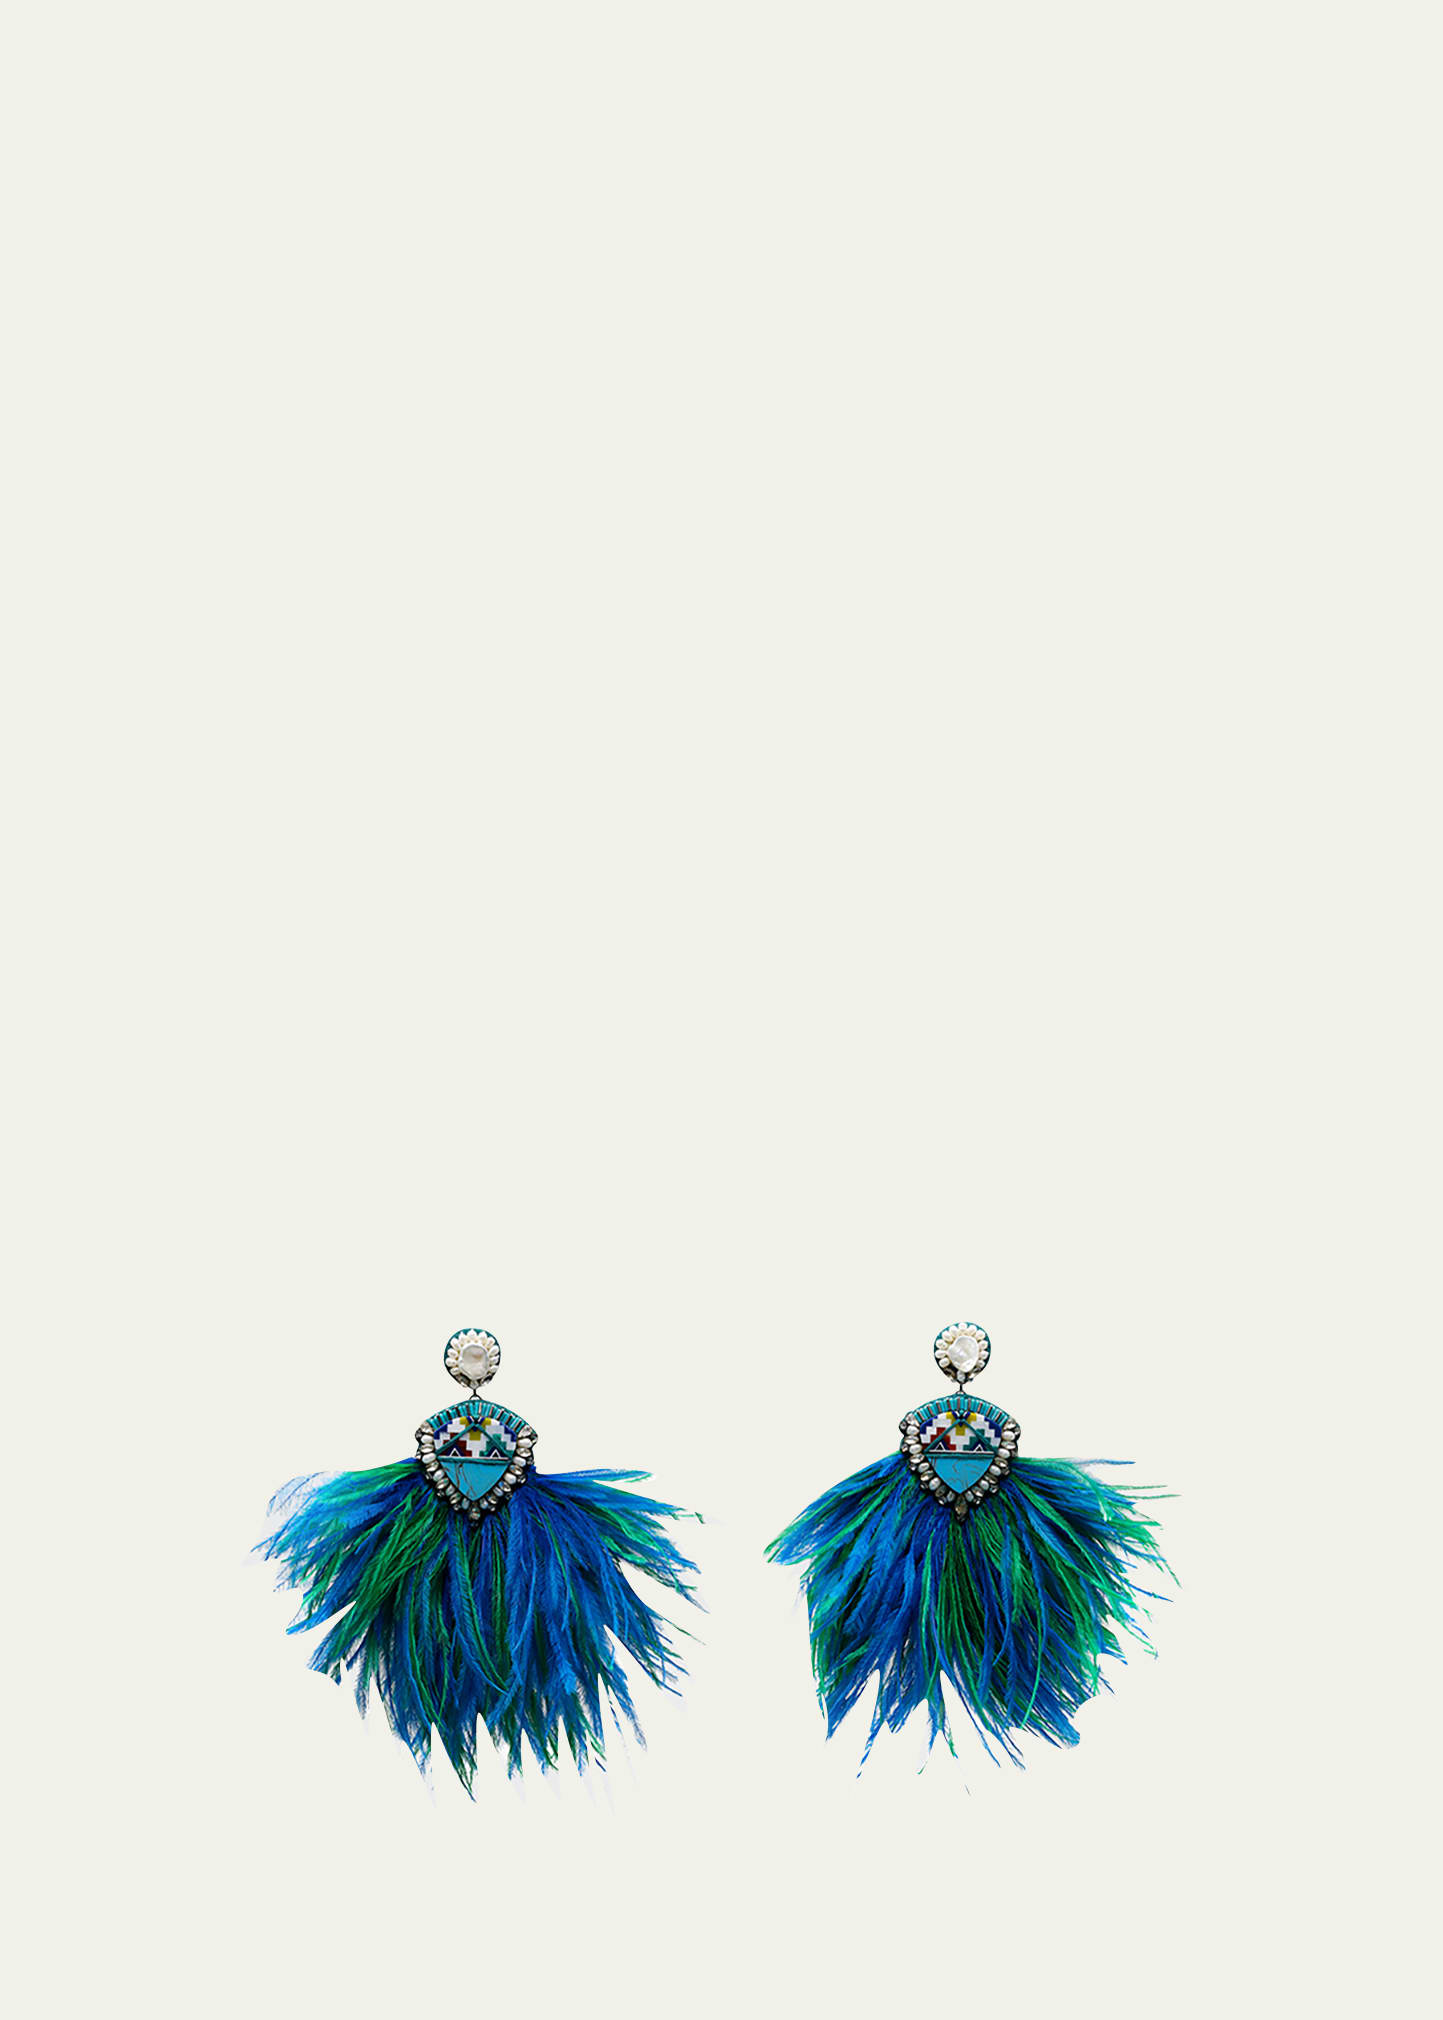 Feather Earrings with Beaded Tops